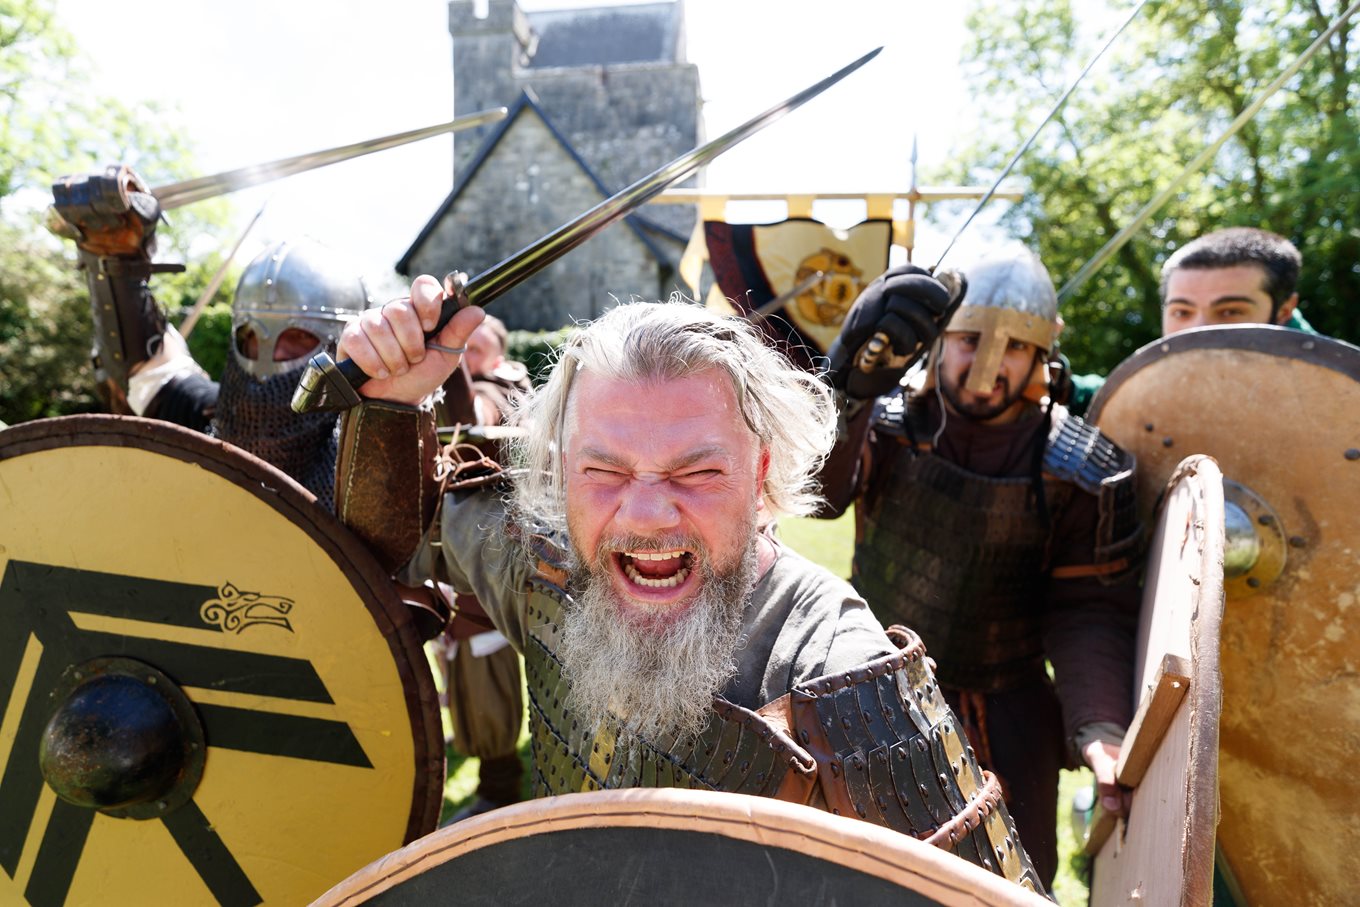 THE VIKINGS ARE COMING! NORSE WARRIORS TO TAKE OVER CRAGGAUNOWEN